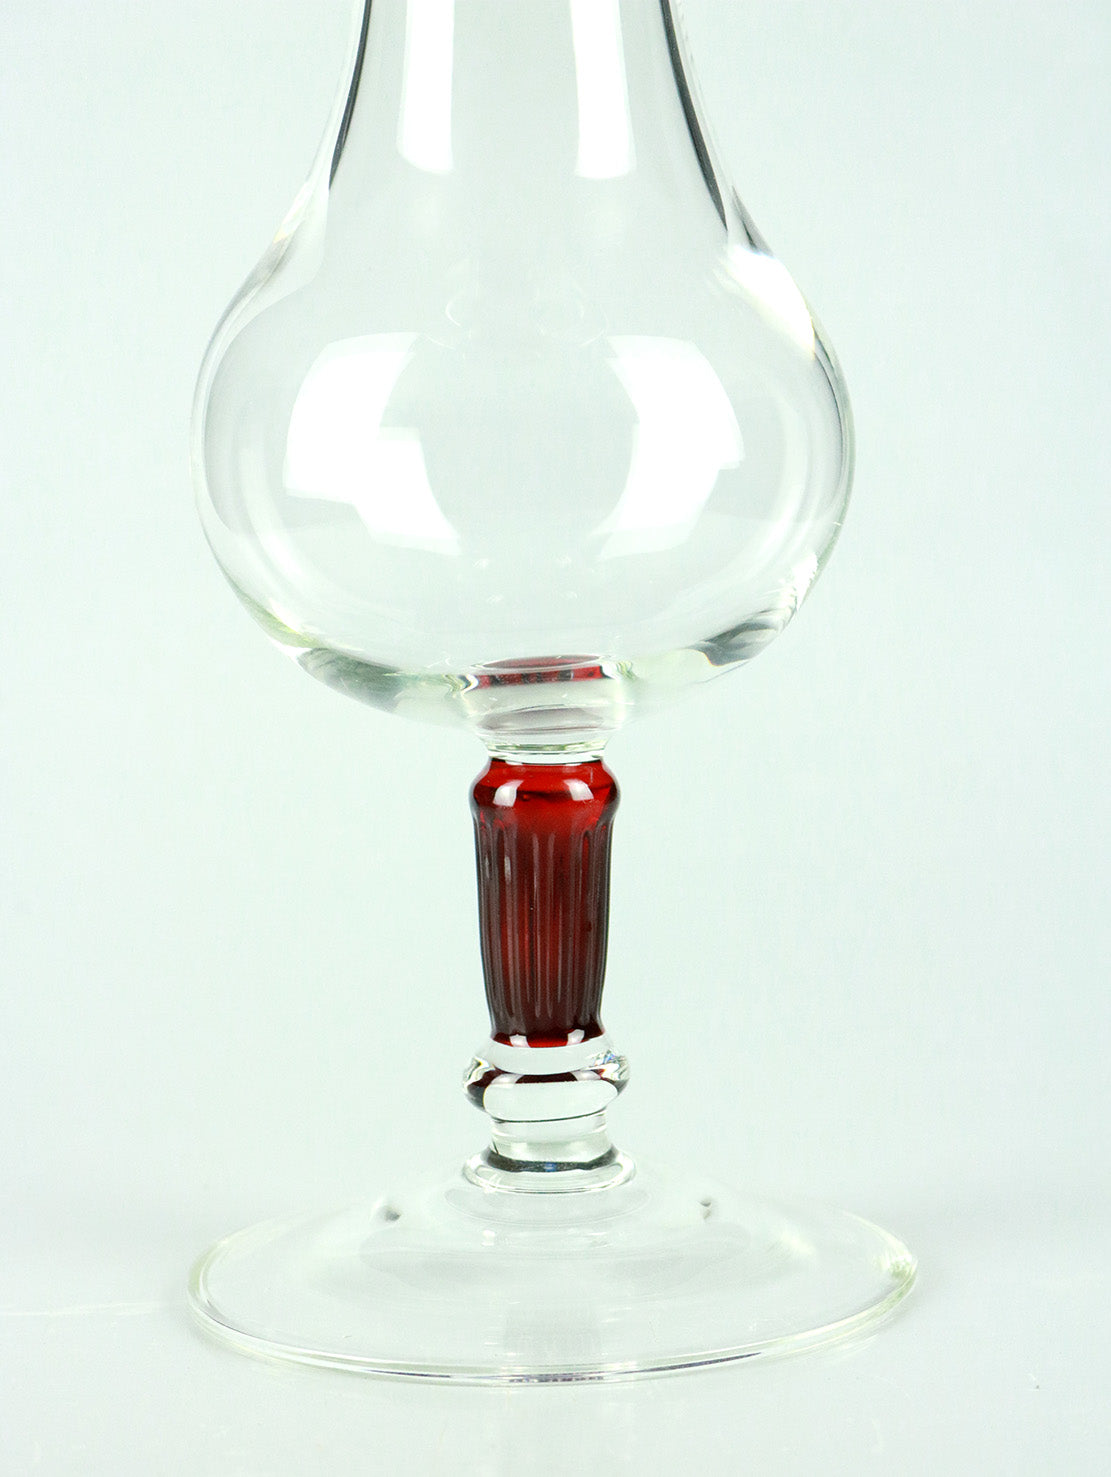 Large Clear Vase With Red Stem